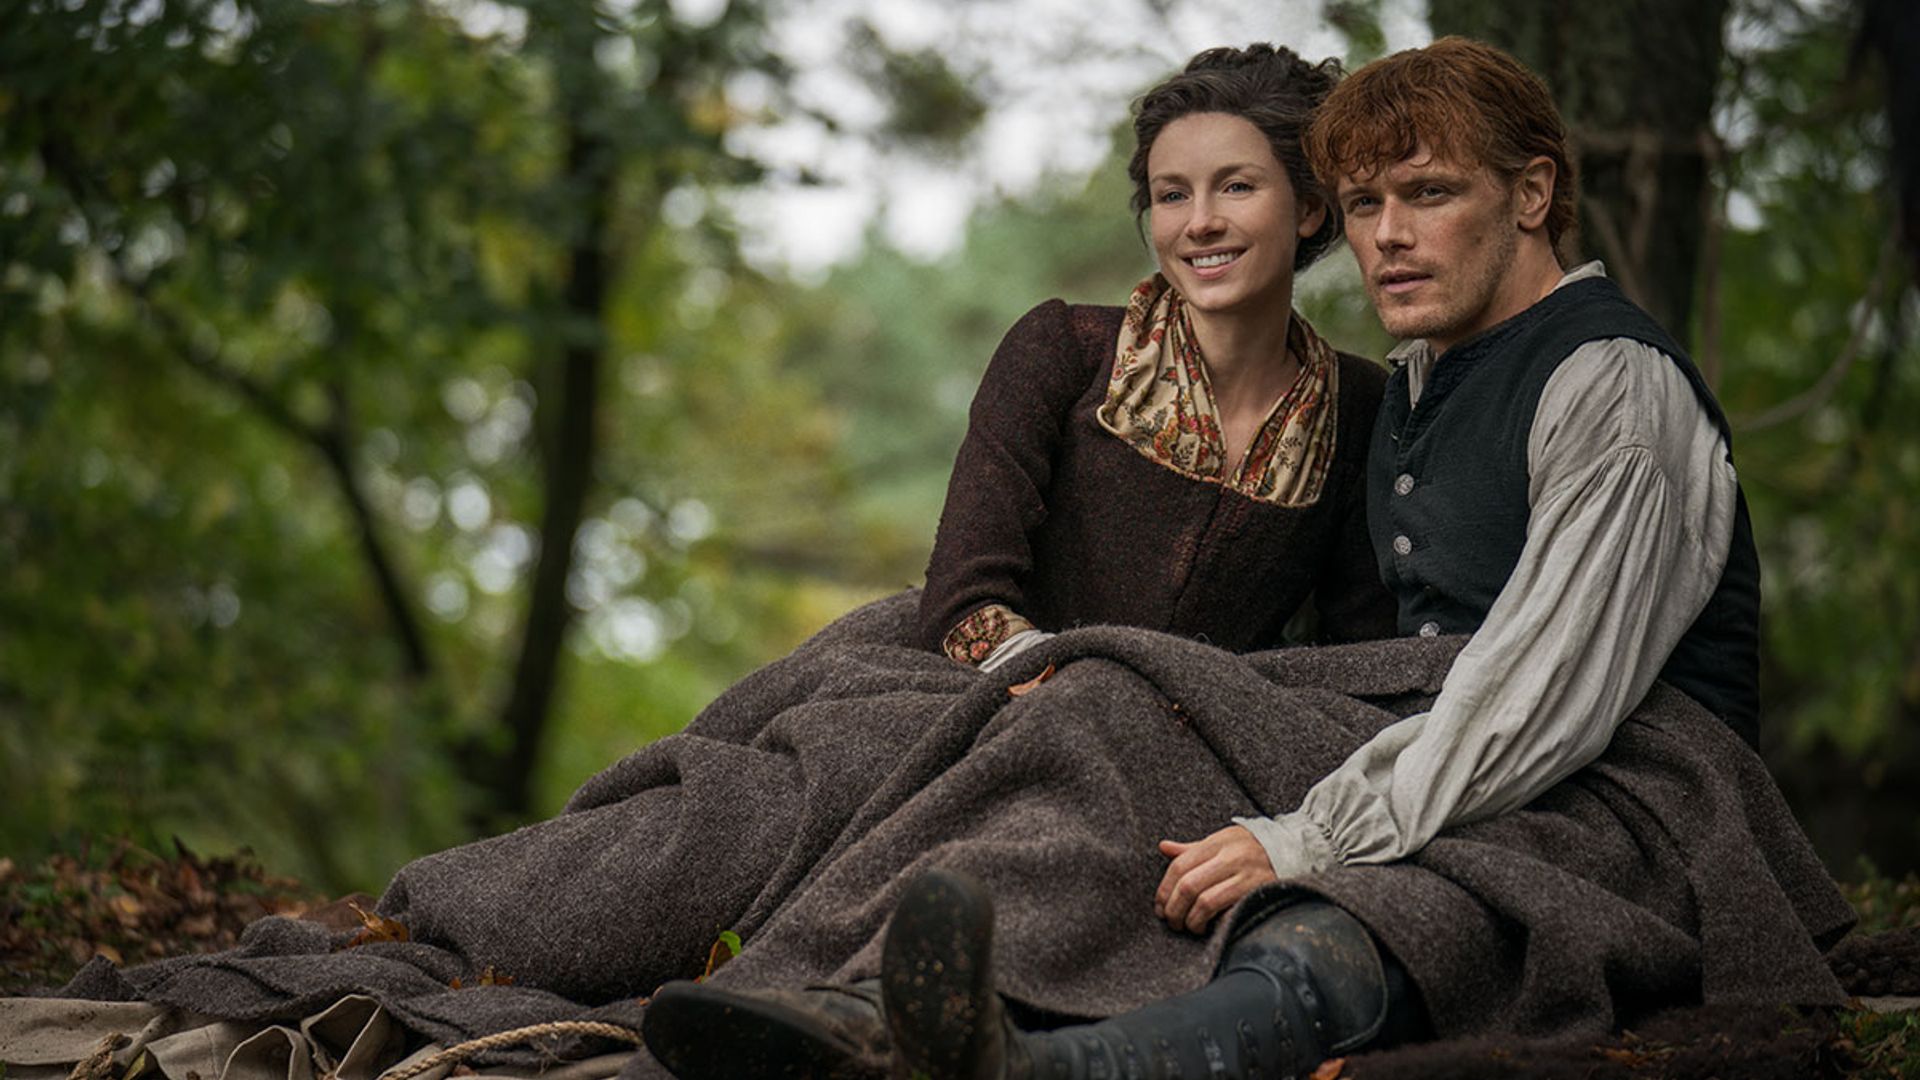 Outlander star Sam Heughan reveals HILARIOUS first reaction to meeting 'telly wife' Caitriona Balfe